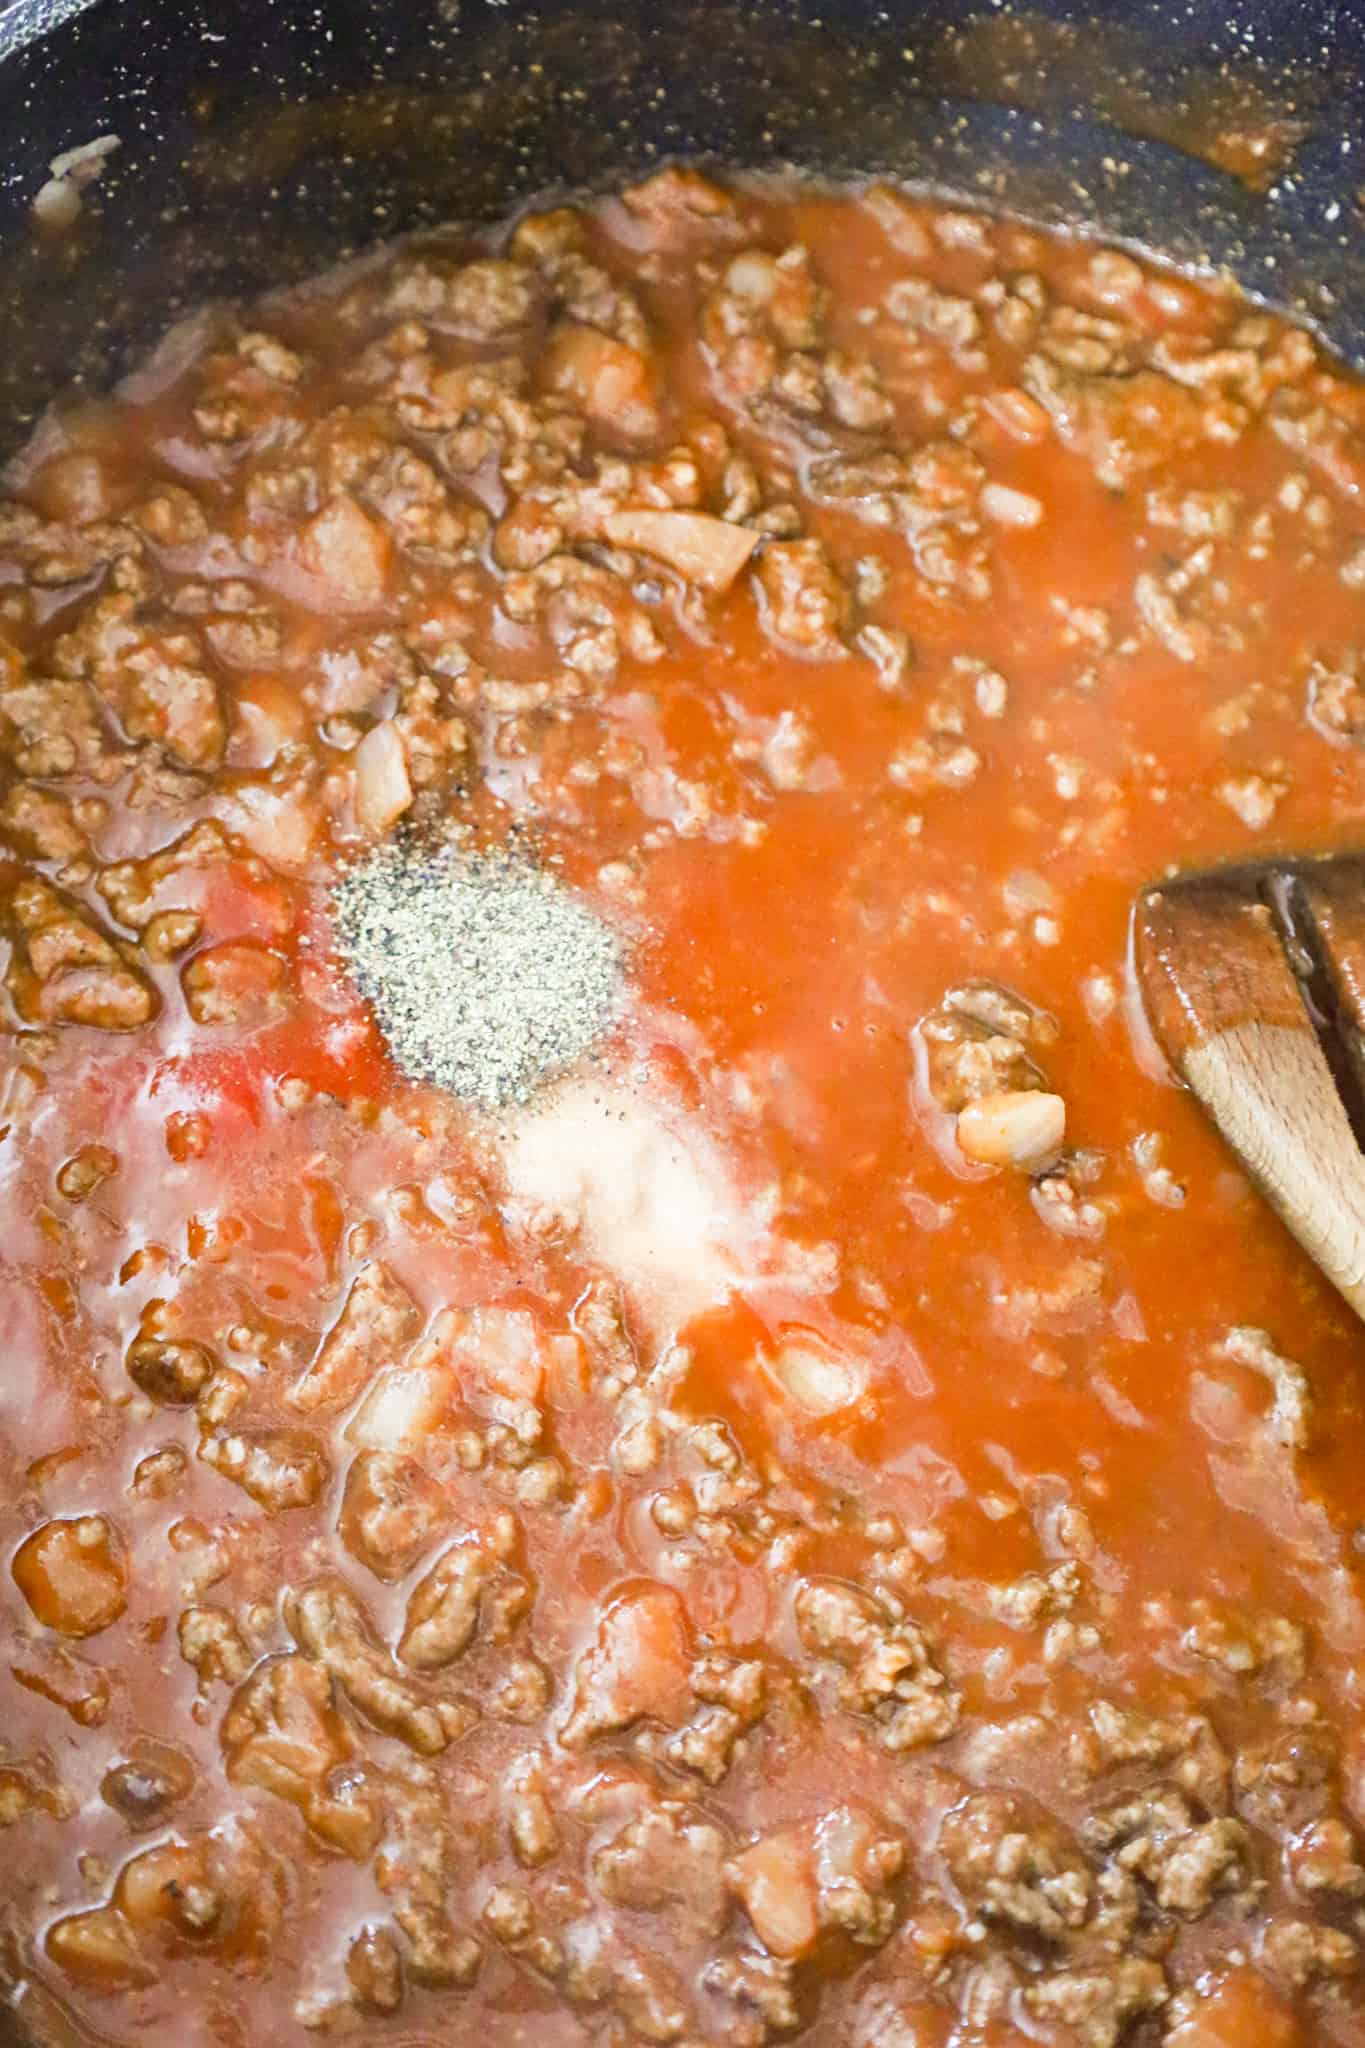 salt and pepper on top of sauce and ground beef mixture in a skillet